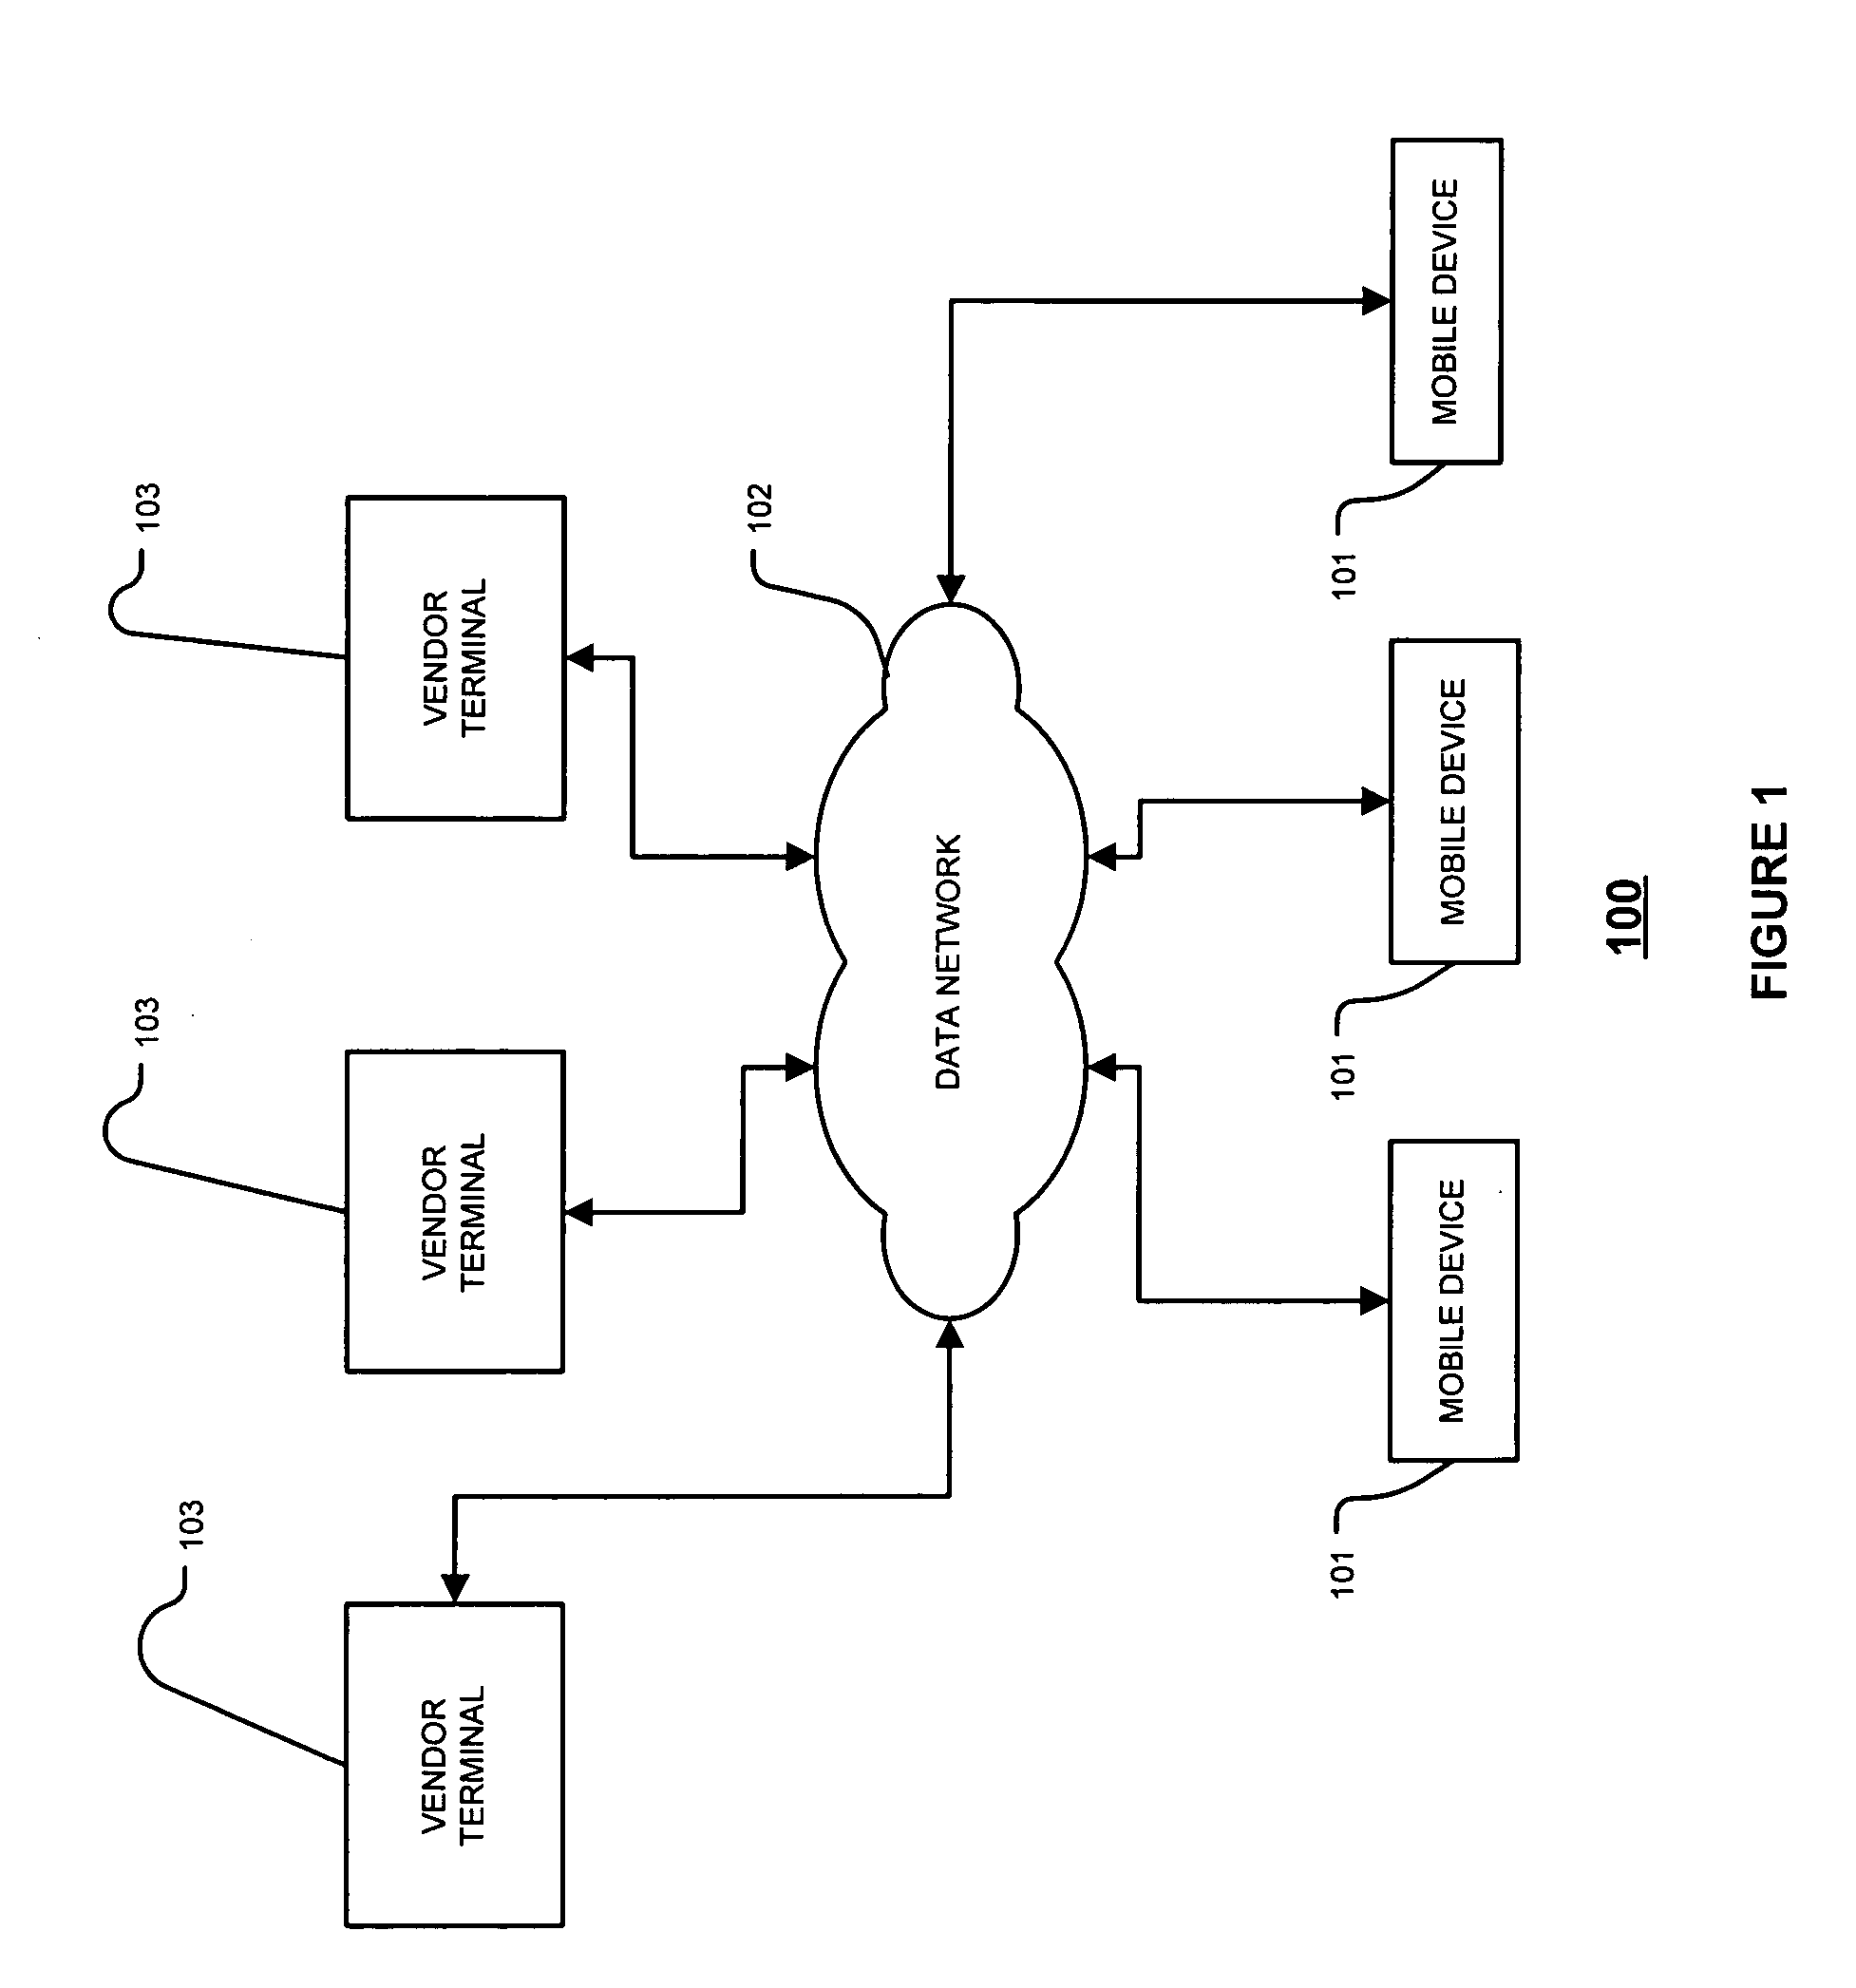 Method and system for downloading configurable user interface elements over a data network